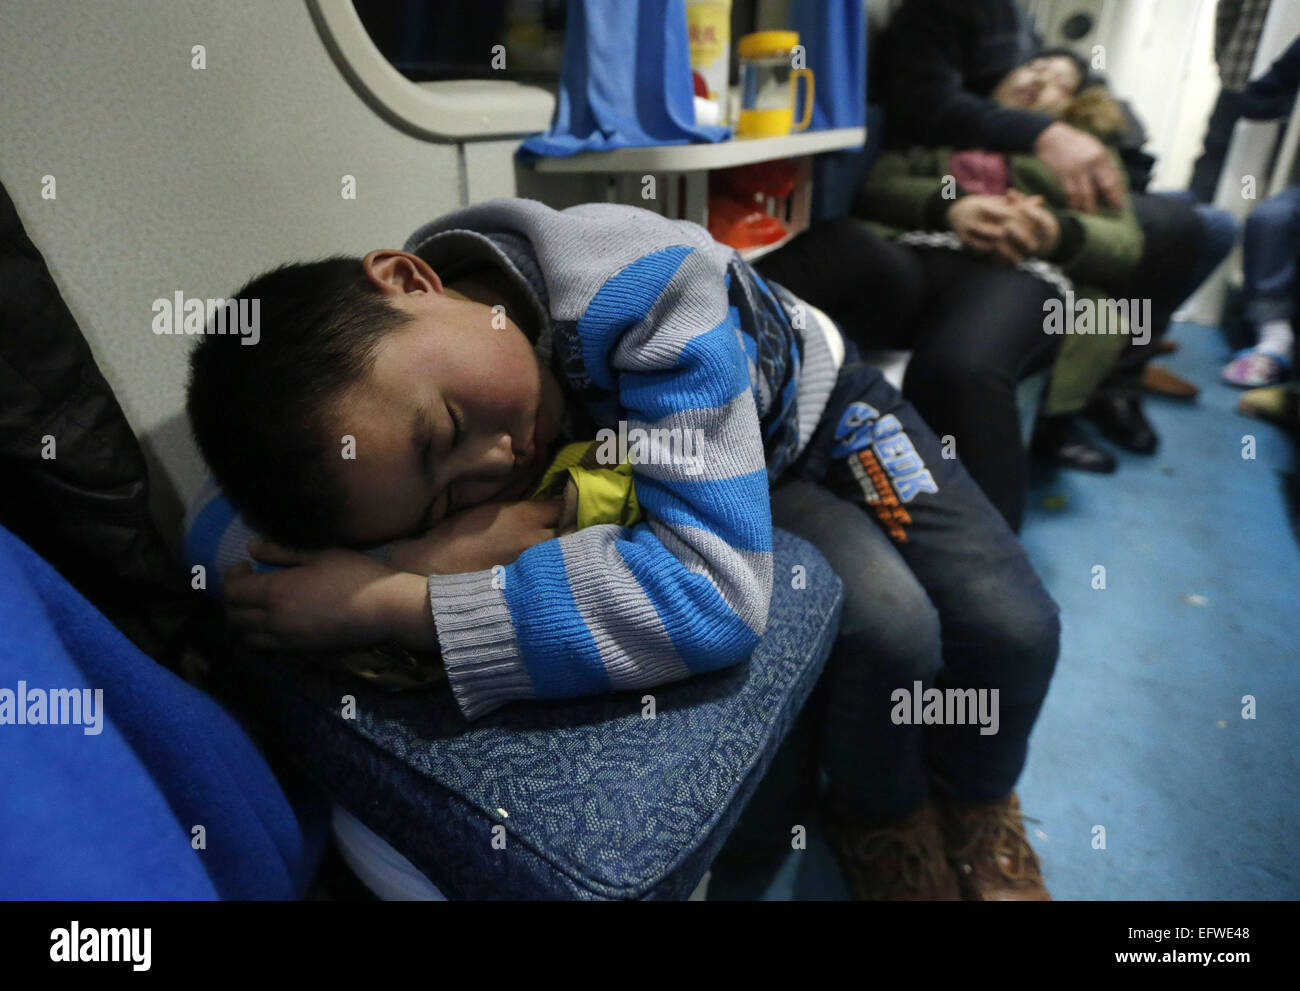 Shanghai, China's Sichuan Province. 9th Sep, 2015. A child sleeps on a chair on train 3663, which runs from east China's Shanghai to Chengdu, capital of southwest China's Sichuan Province, on Sept. 9, 2015. The Spring Festival, or the Chinese lunar New Year which starts from Feb. 19 this year, is known as the world's biggest migration, with millions of people traveling vast distances for family reunions. © Ding Ting/Xinhua/Alamy Live News Stock Photo